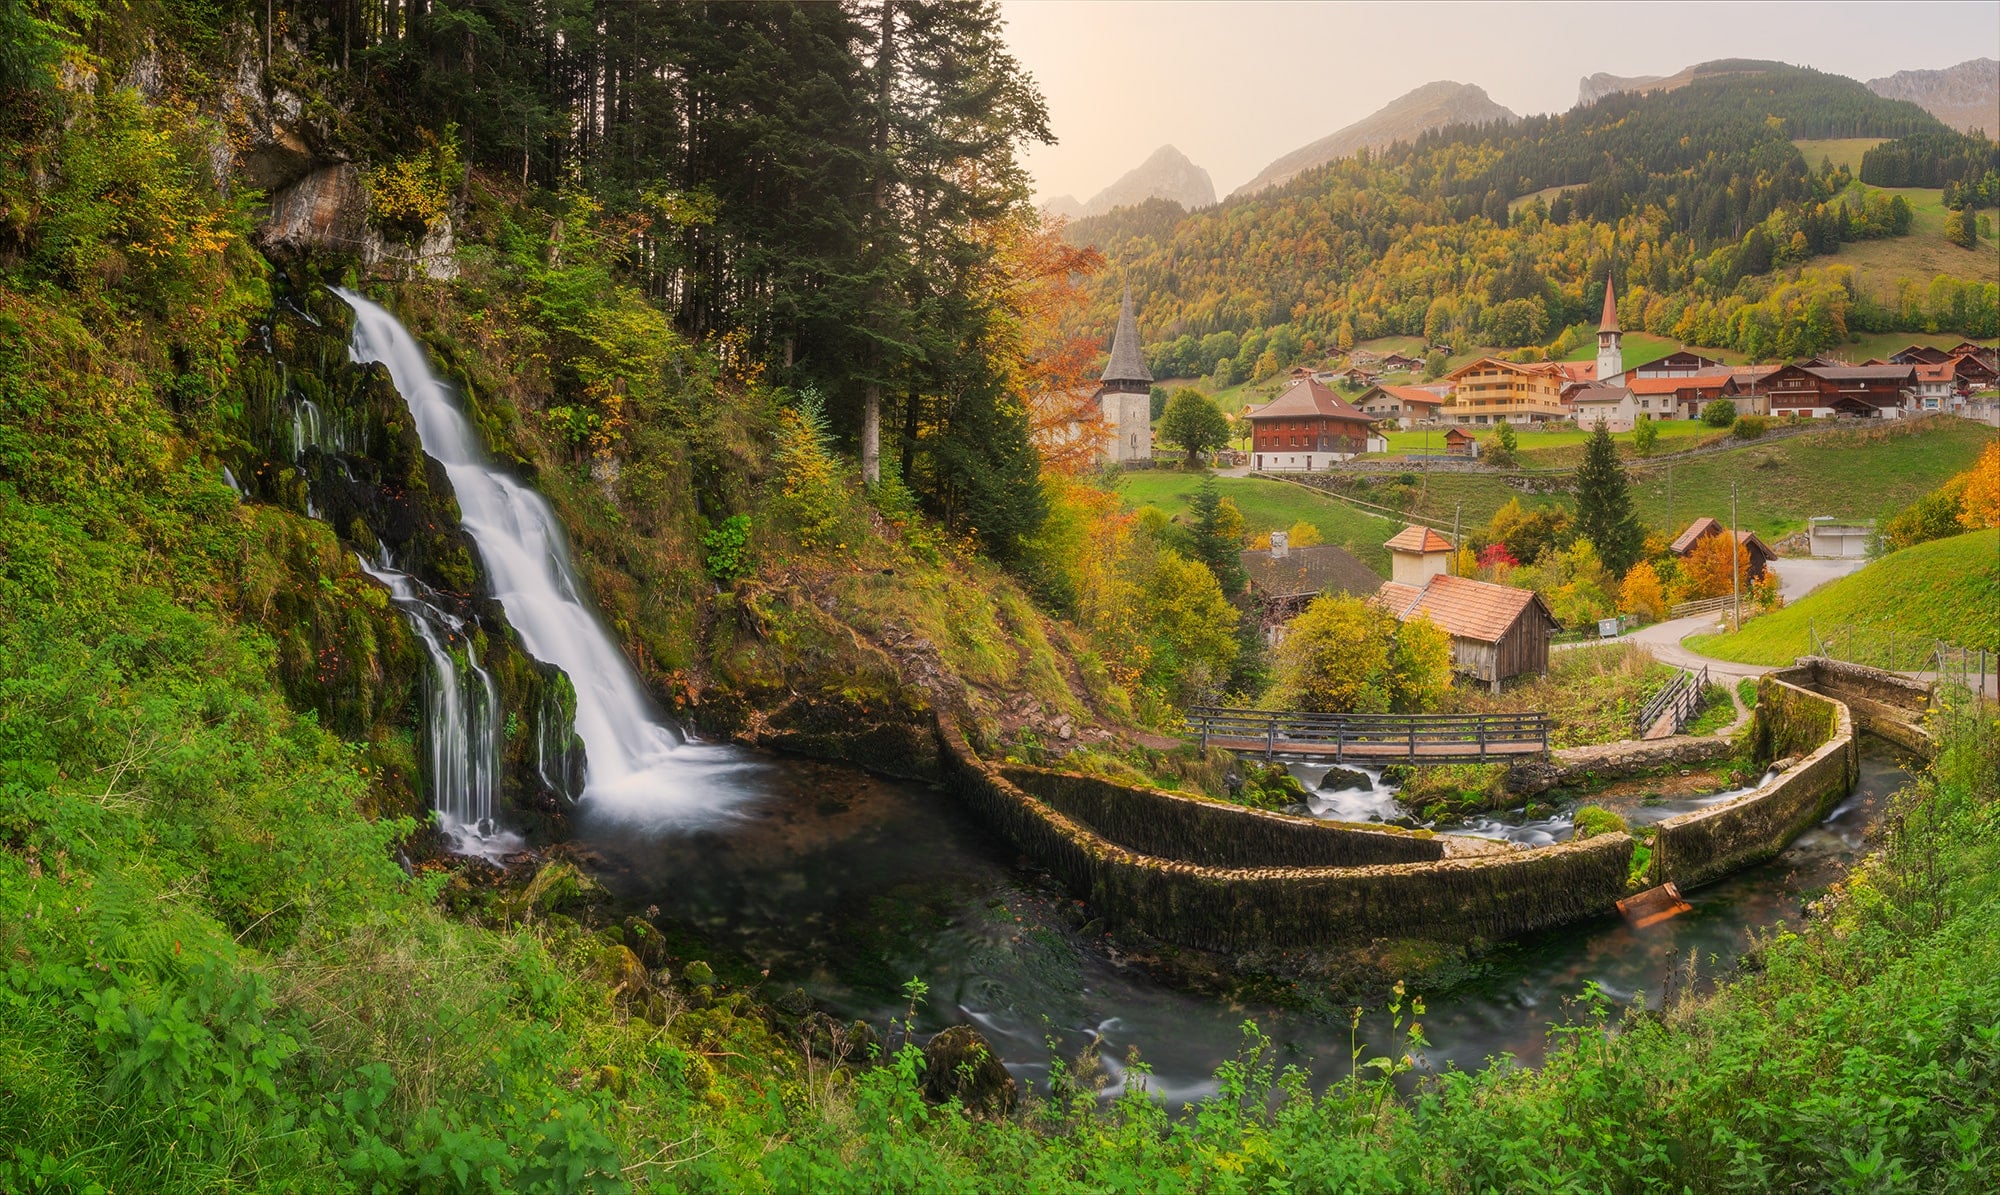 Experience the breathtaking beauty of Jaun village and its surrounding landscape in autumn, captured in this stunning panorama and long exposure photograph. Located in Canton Fribourg, Switzerland, this mesmerizing image showcases the picturesque waterfall alongside the charming village of Jaun. Immerse yourself in the serene atmosphere and vibrant hues of autumn foliage, beautifully frozen in time through long exposure photography. Explore the natural splendor of Switzerland's landscapes in this captivating panorama by